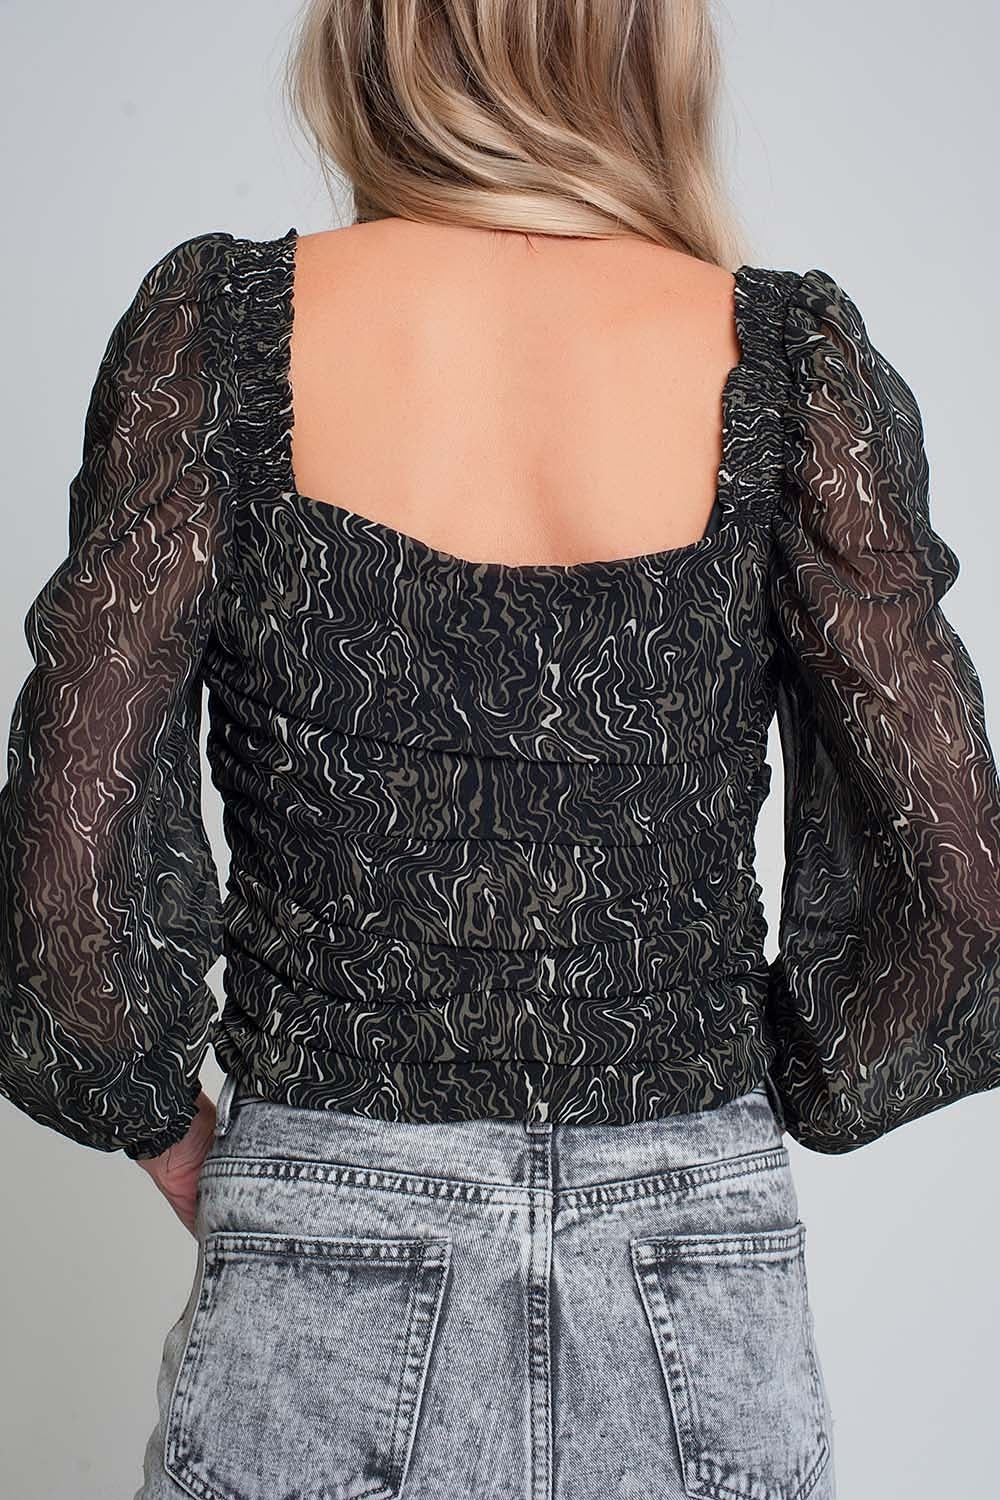 See-through top with long sleeves geo print in black color with elastic cuffs Szua Store